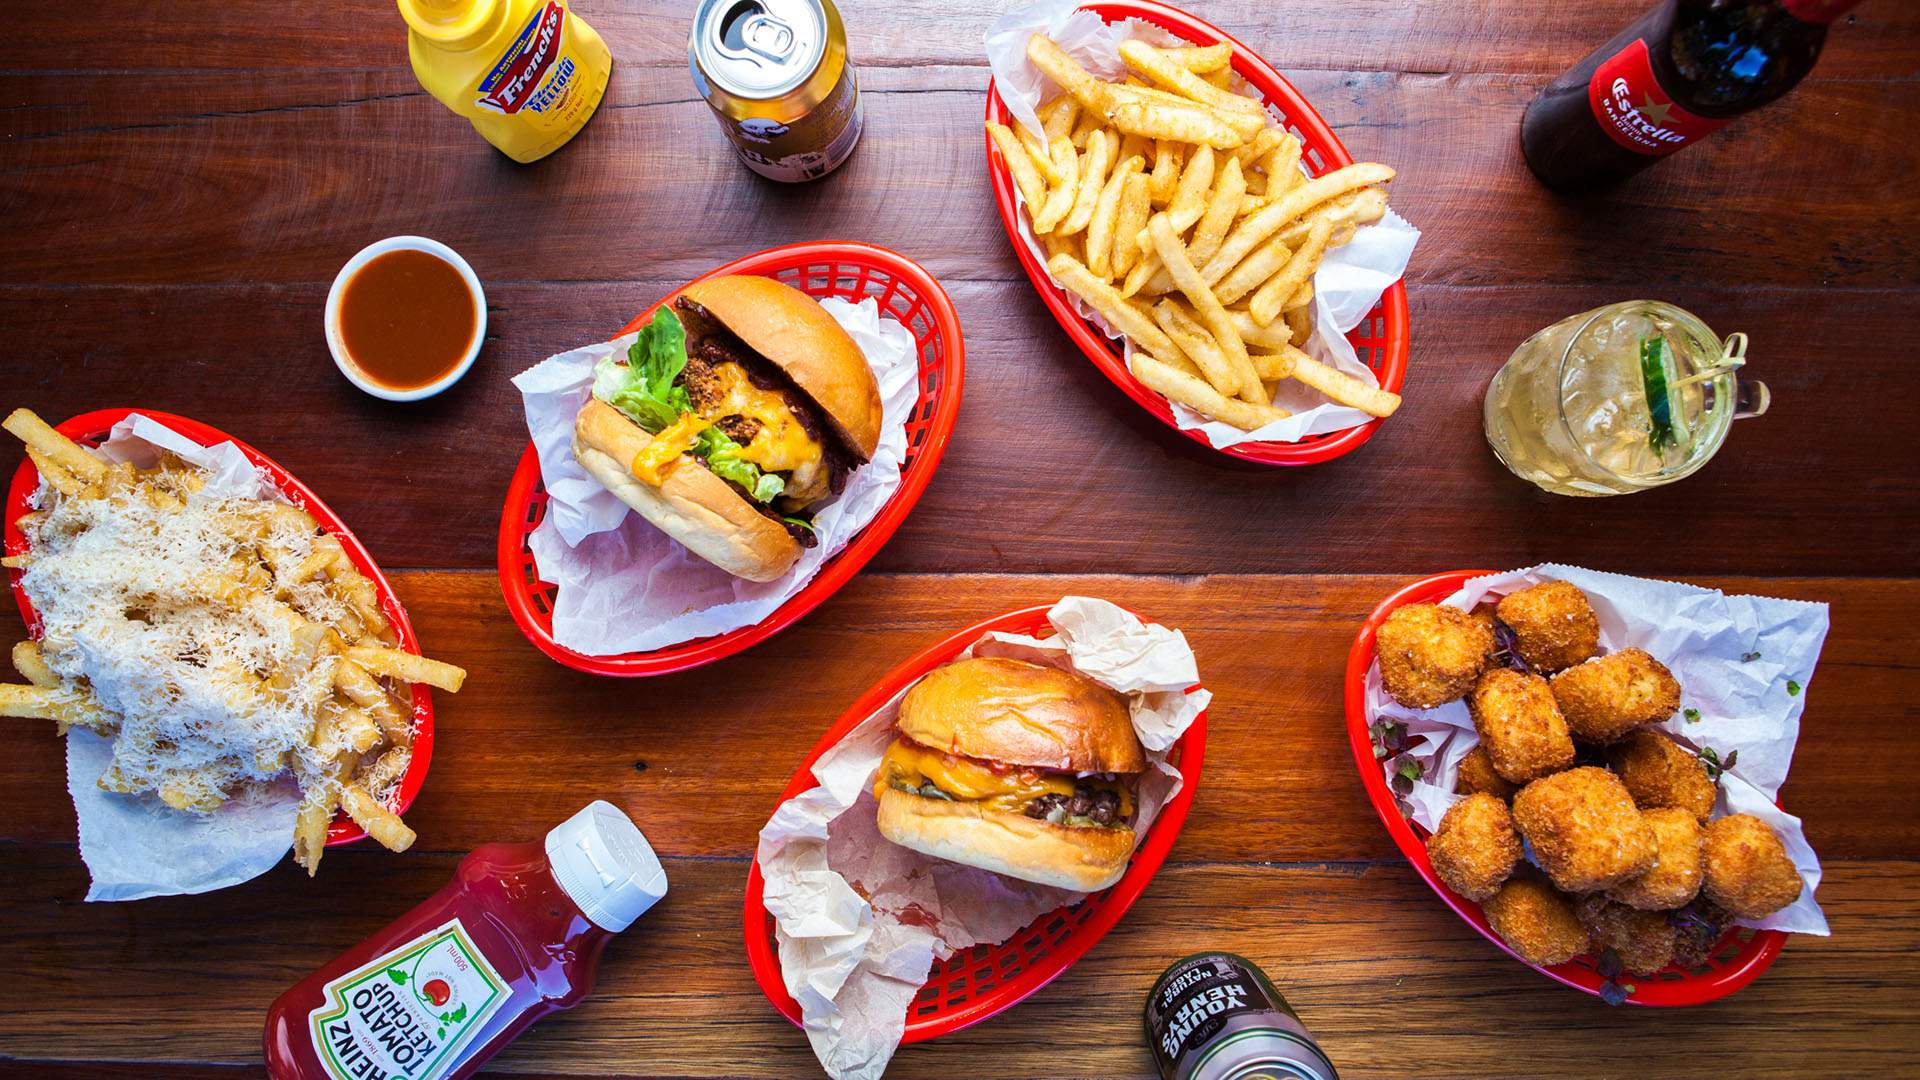 Billykart West End Has Opened a Neighbouring Bar and Burger Joint